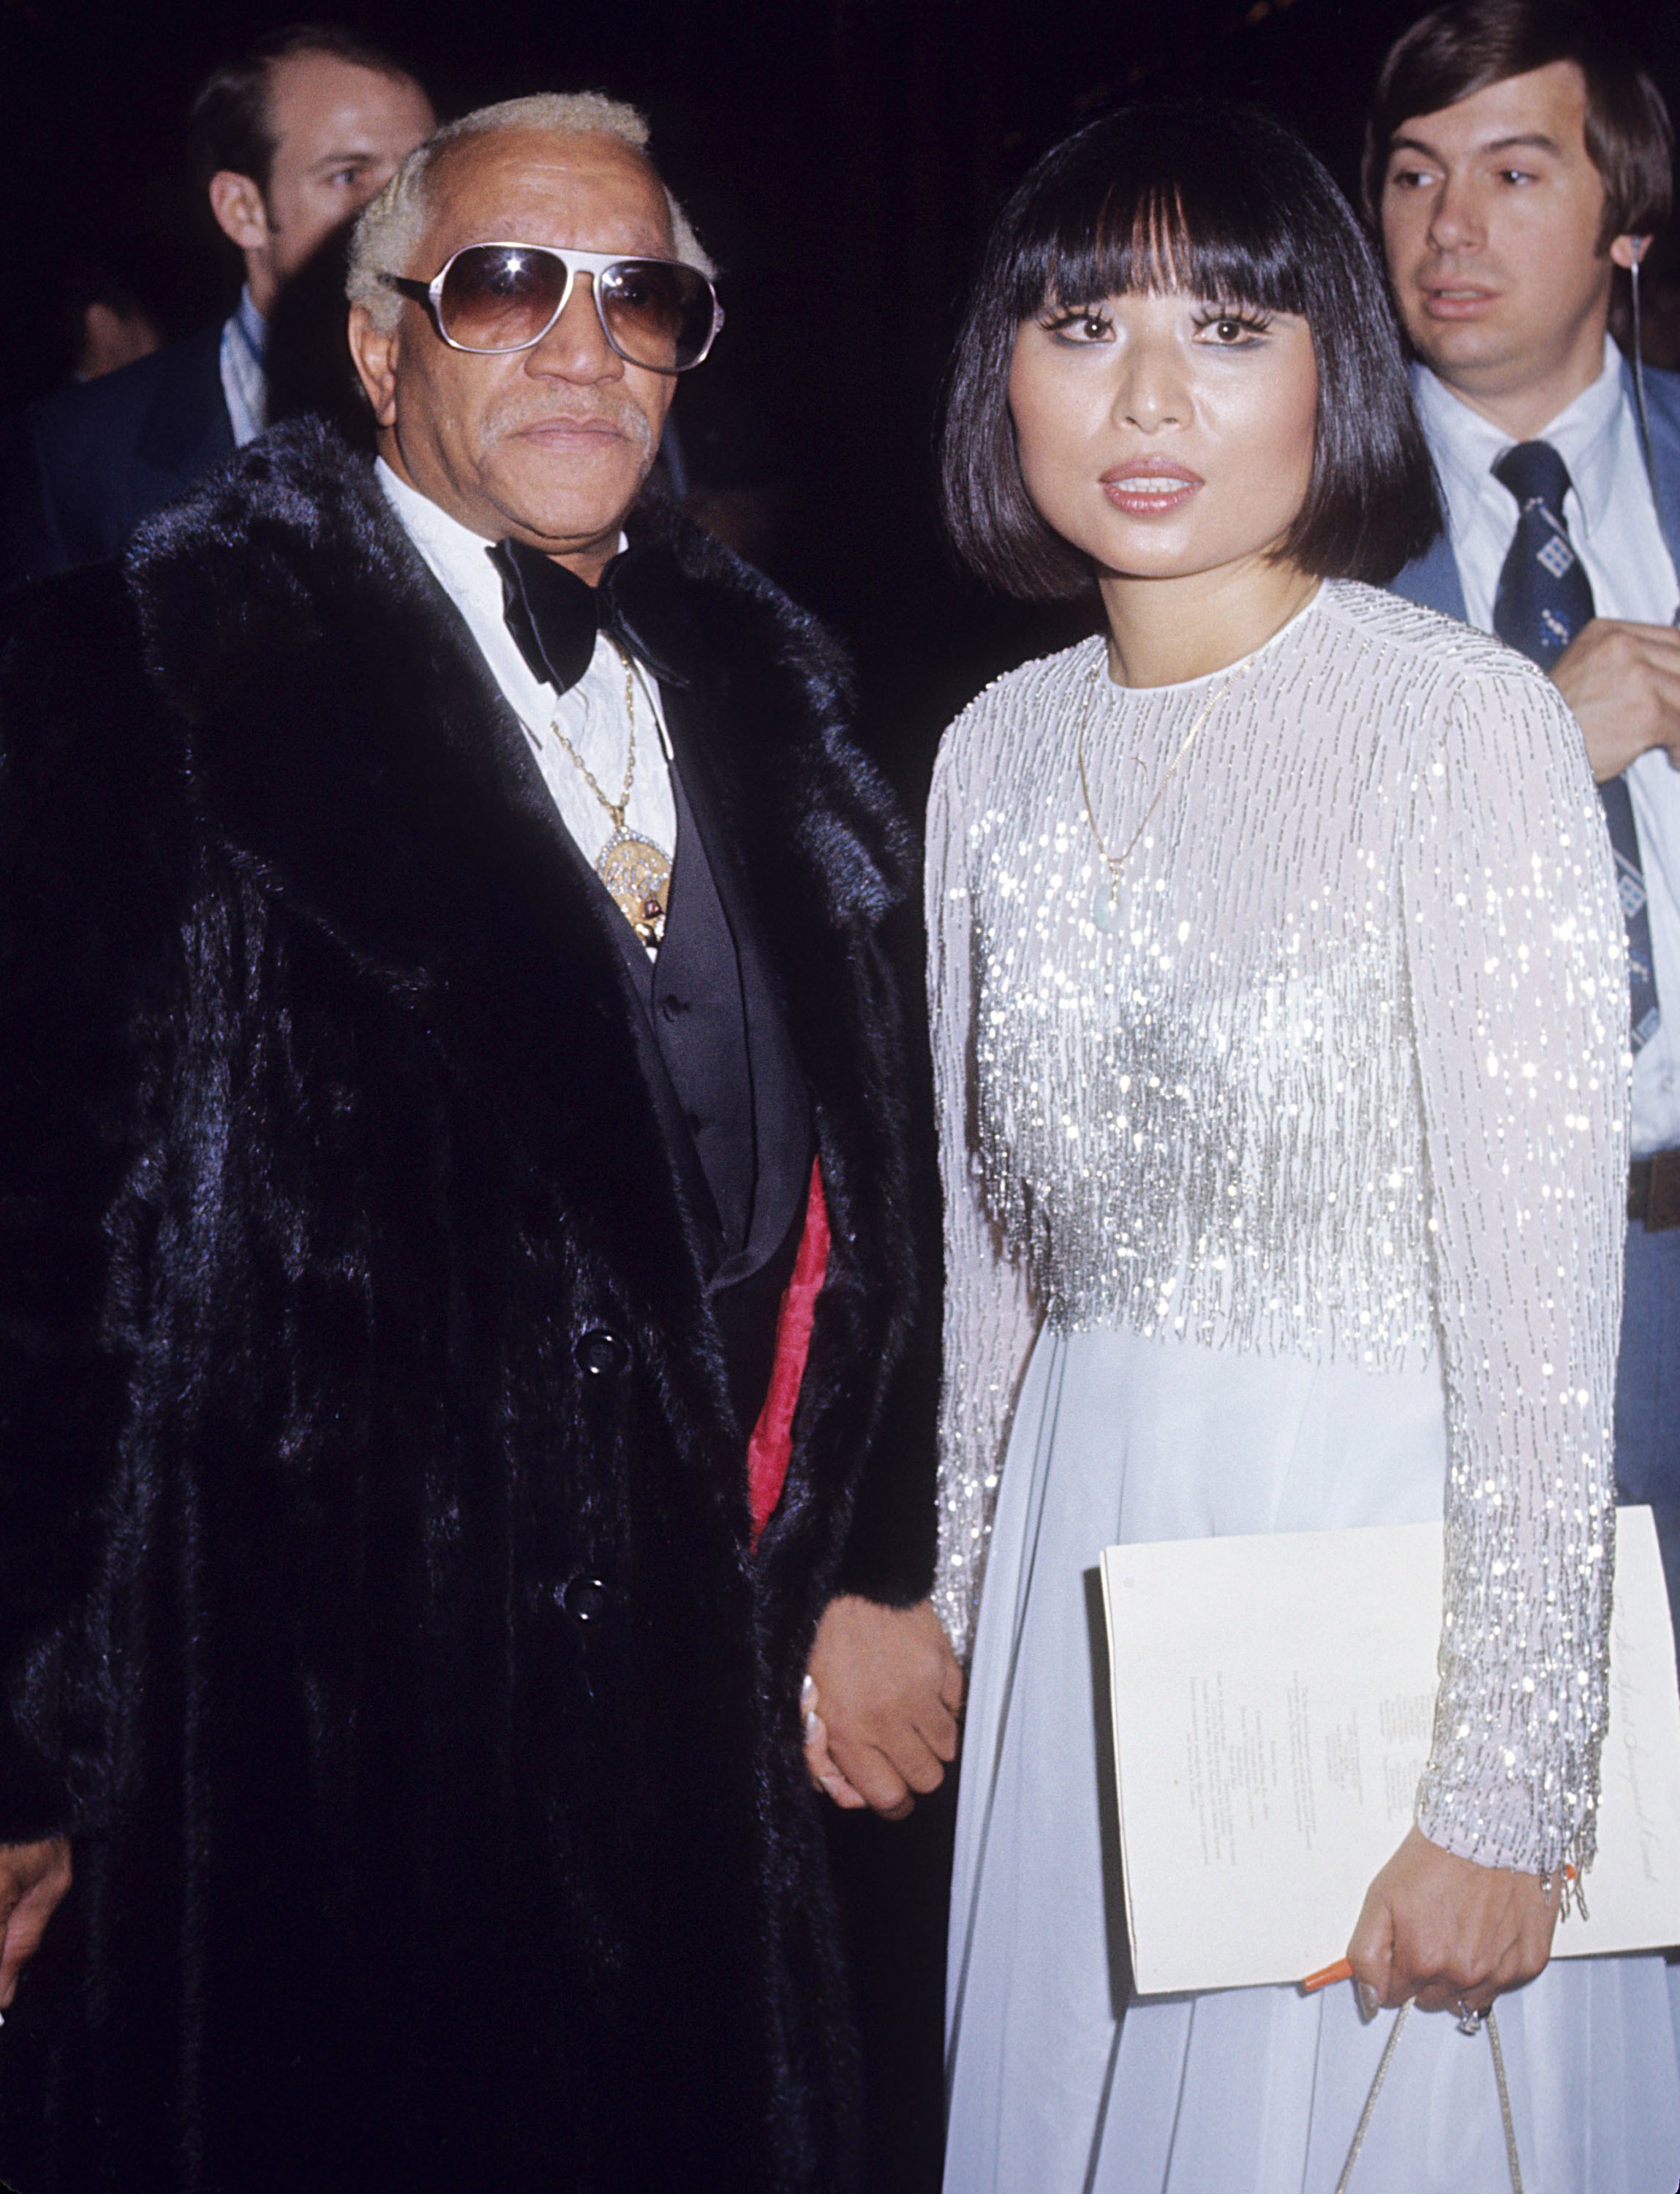 Redd Foxx and wife Yun Chi Chung at President Jimmy Carter's Inaugural Ball on January 20, 1977 in Washington D.C. | Photo: Getty Images